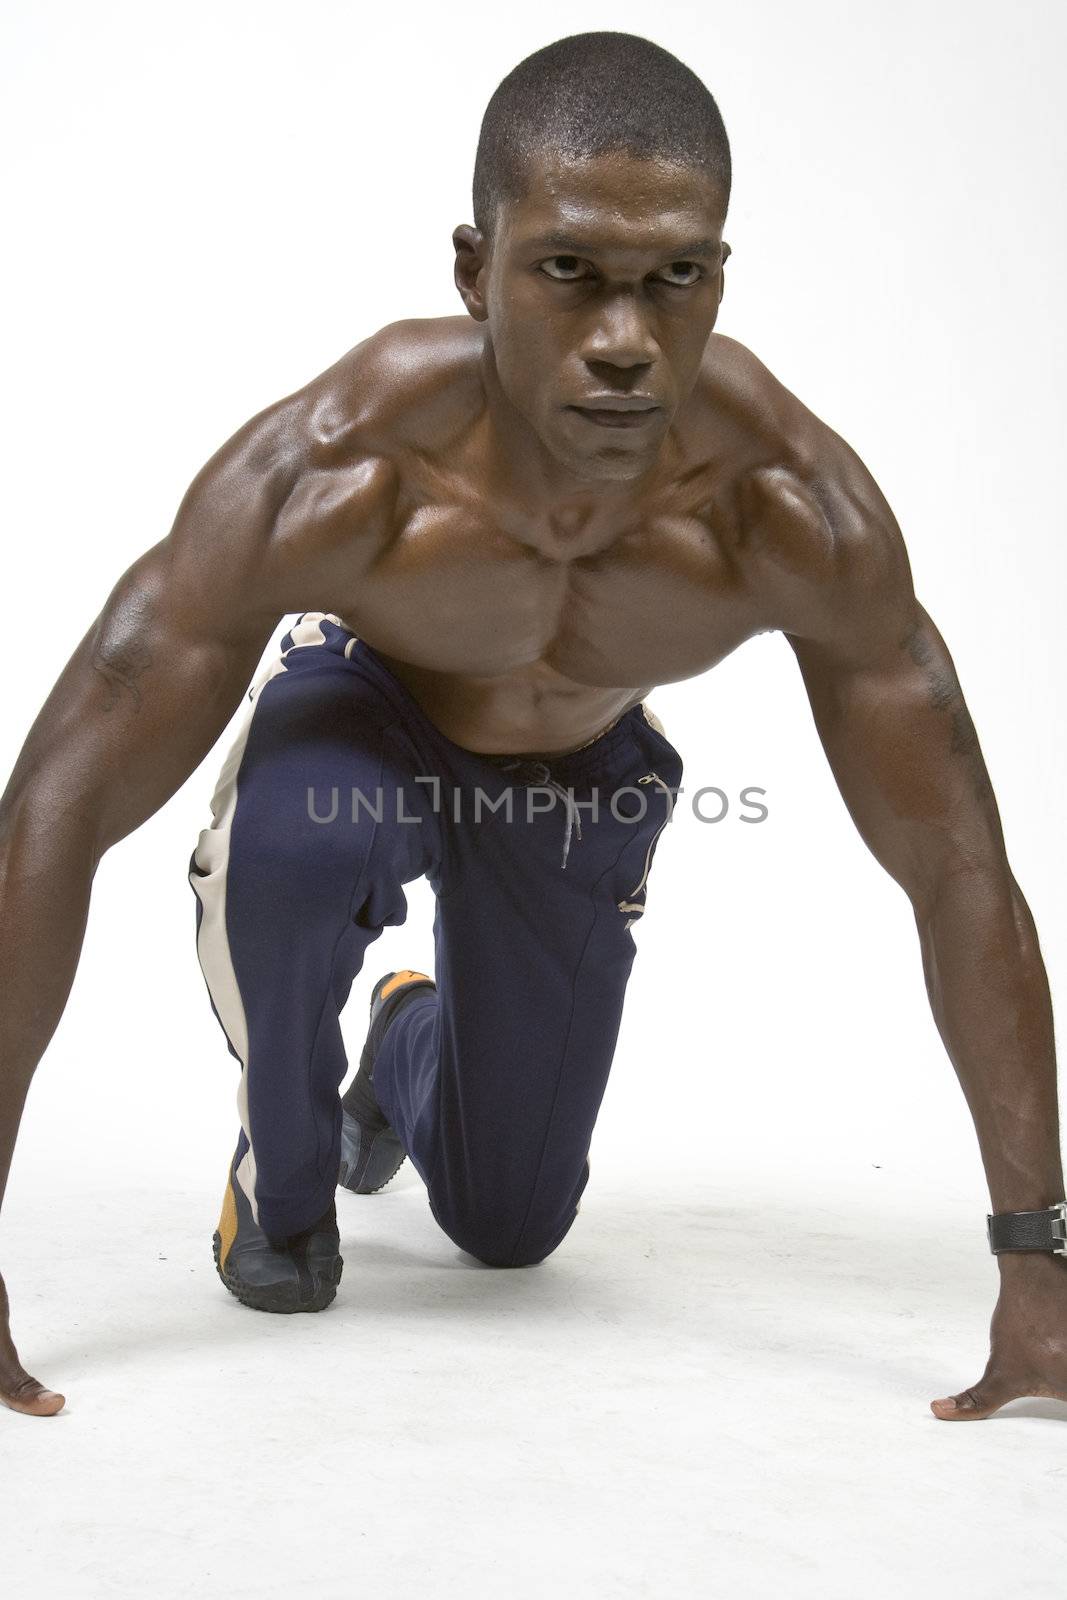 Muscular Black Man shows some musce